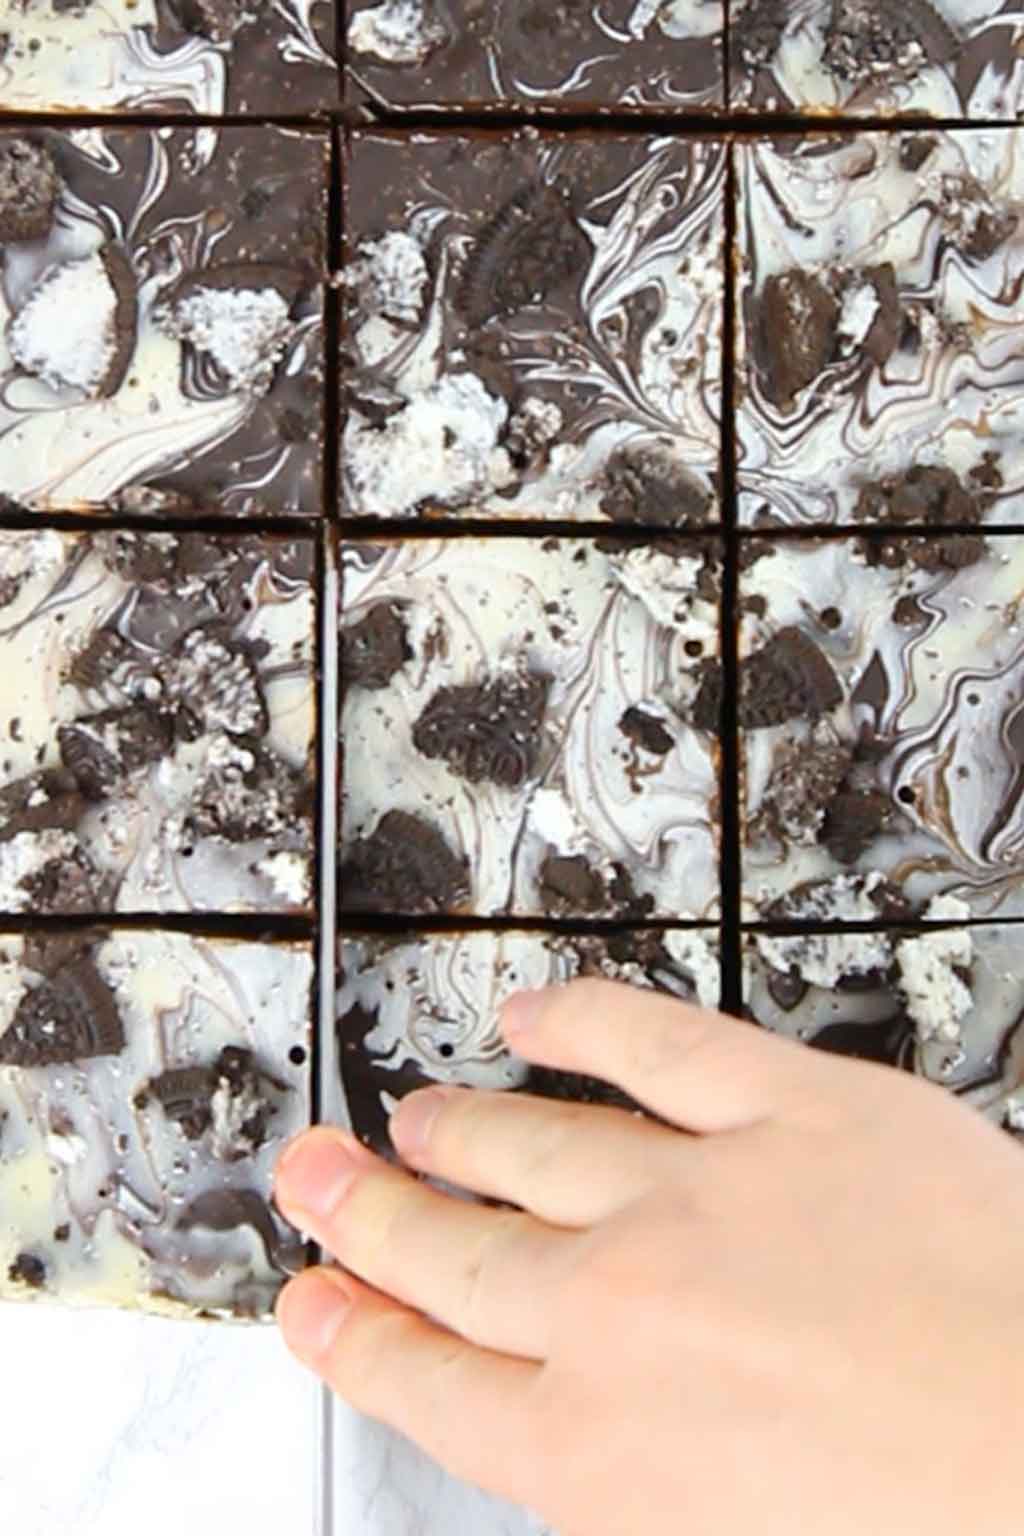 Cutting the Oreo tiffin into squares